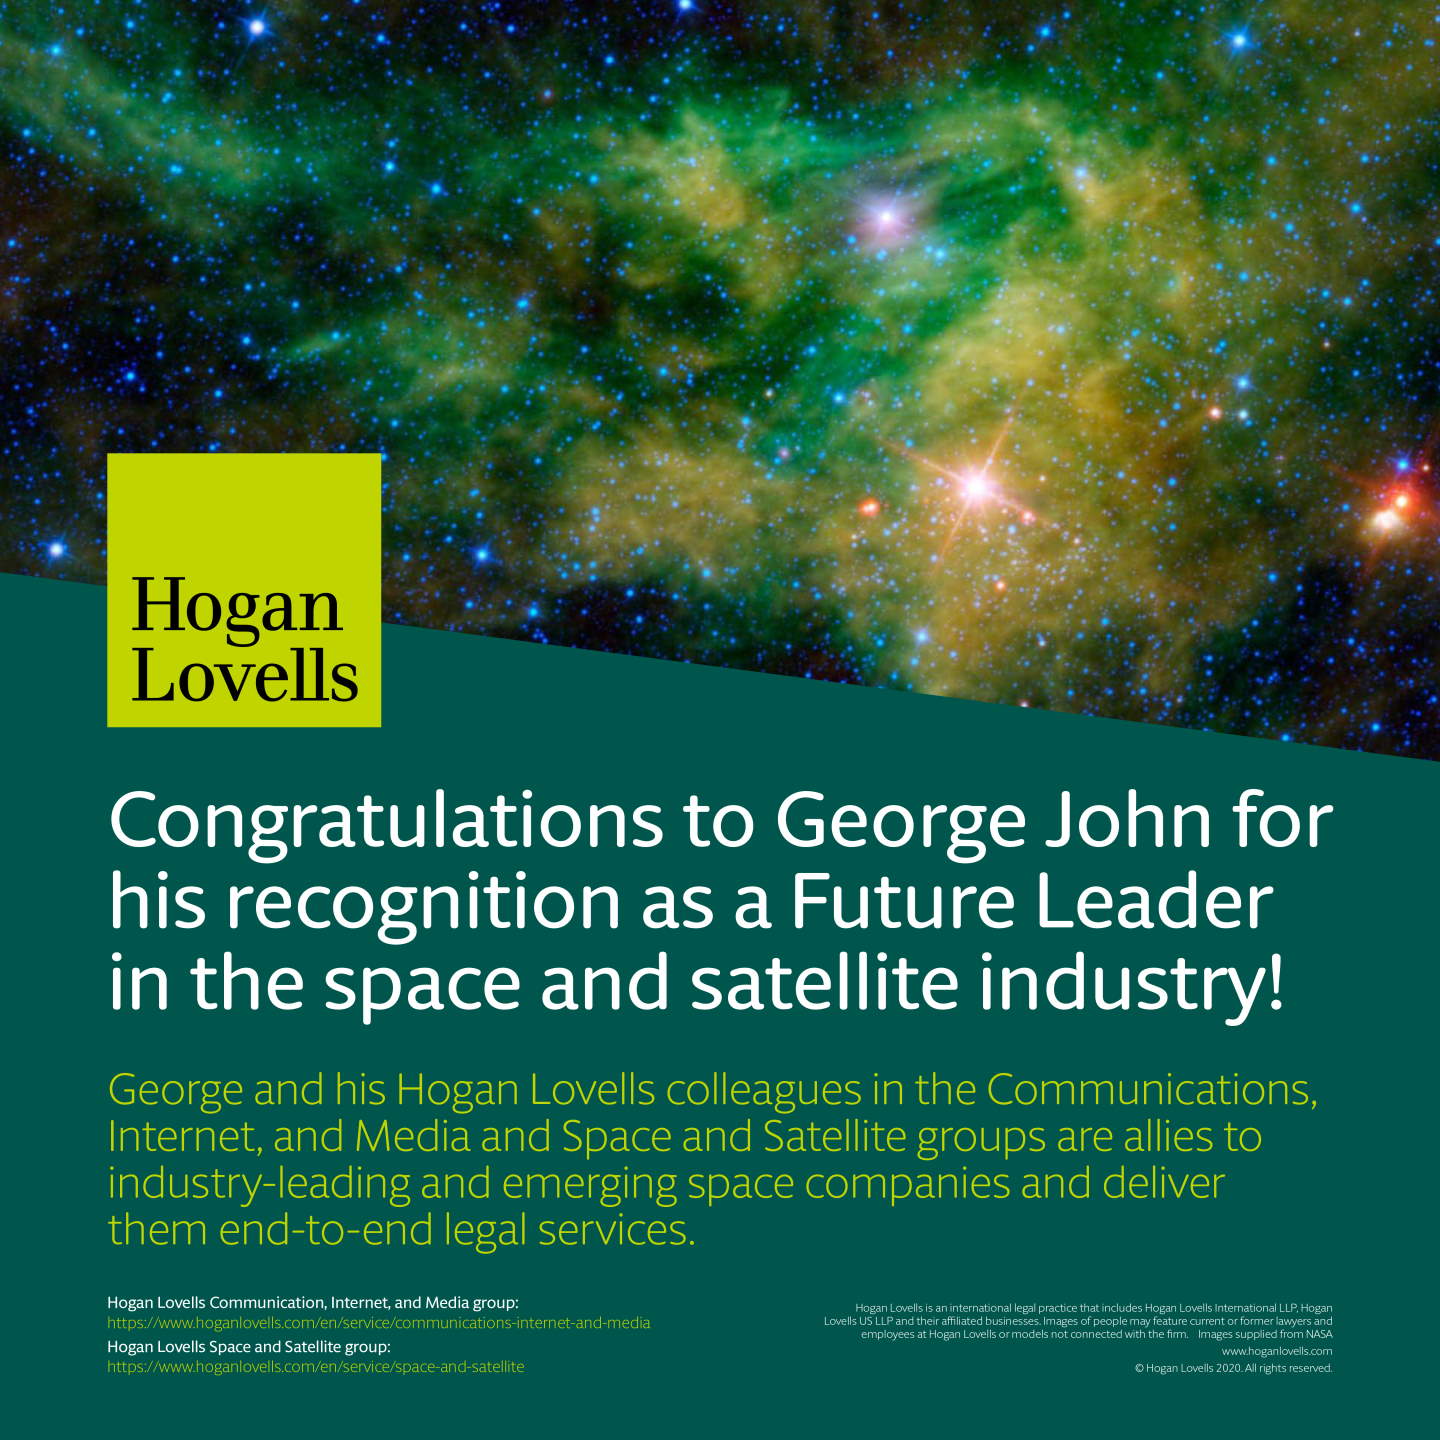 Congratulations from Hogan Lovells to George John for his recognition as a Future Leader of the space and satellite industry!